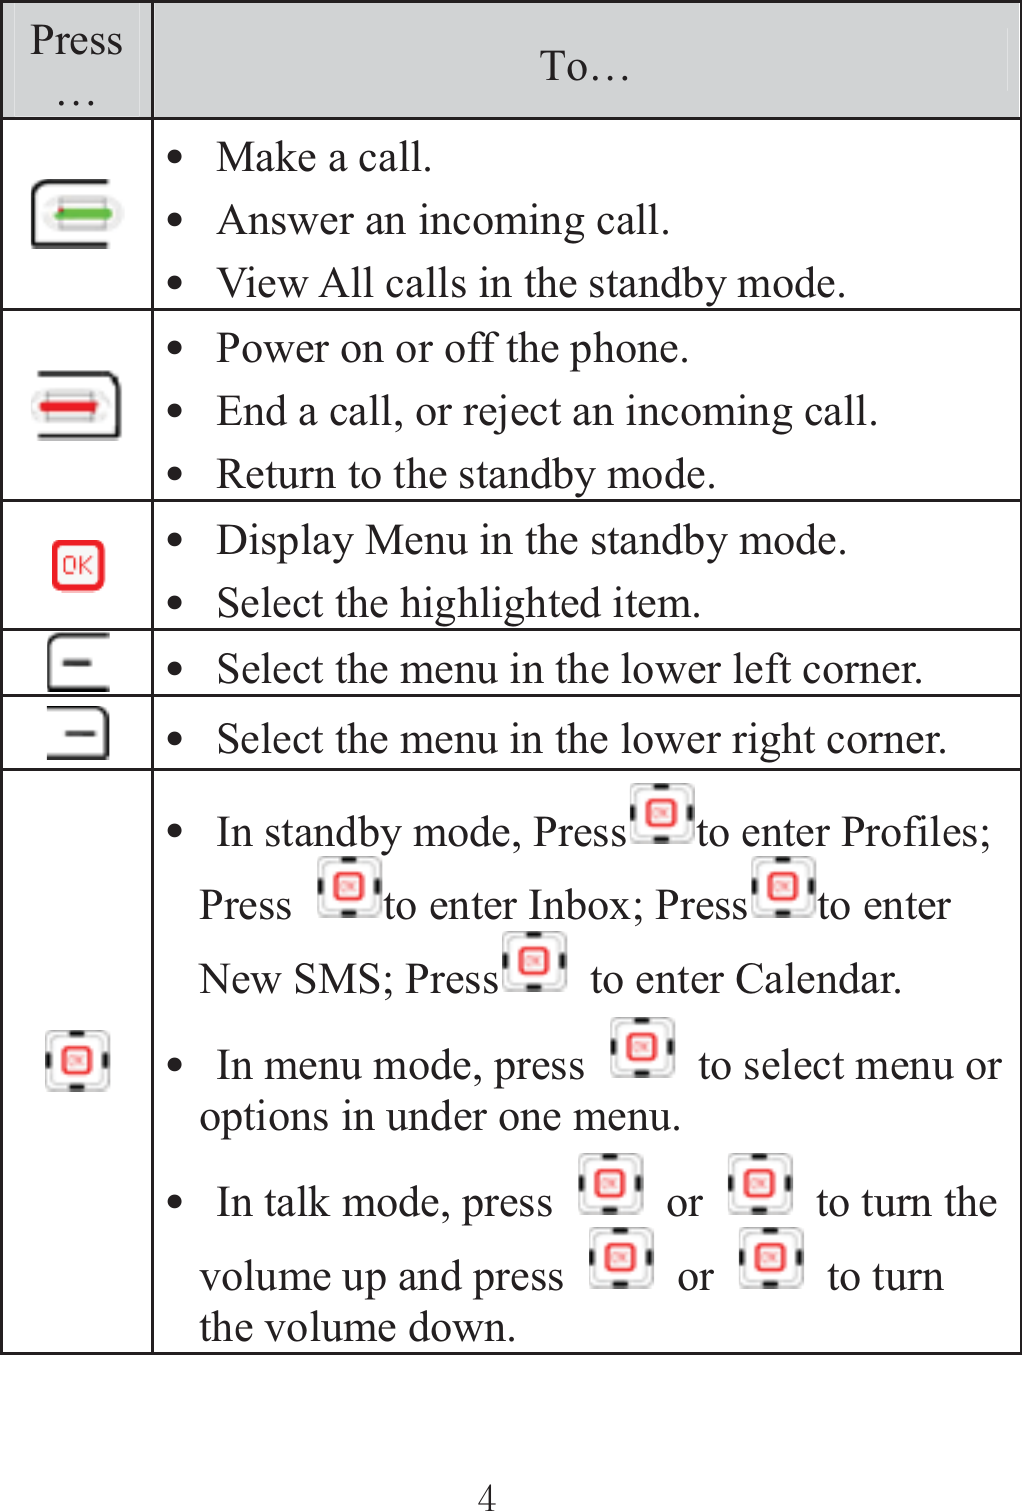 Press…To… zMake a call. zAnswer an incoming call. zView All calls in the standby mode.   zPower on or off the phone. zEnd a call, or reject an incoming call. zReturn to the standby mode. zDisplay Menu in the standby mode. zSelect the highlighted item. zSelect the menu in the lower left corner. zSelect the menu in the lower right corner. zIn standby mode, Press to enter Profiles; Press  to enter Inbox; Press to enter New SMS; Press   to enter Calendar. zIn menu mode, press    to select menu or options in under one menu. zIn talk mode, press   or    to turn the volume up and press   or   to turn the volume down. ٻٻڏٻٻ